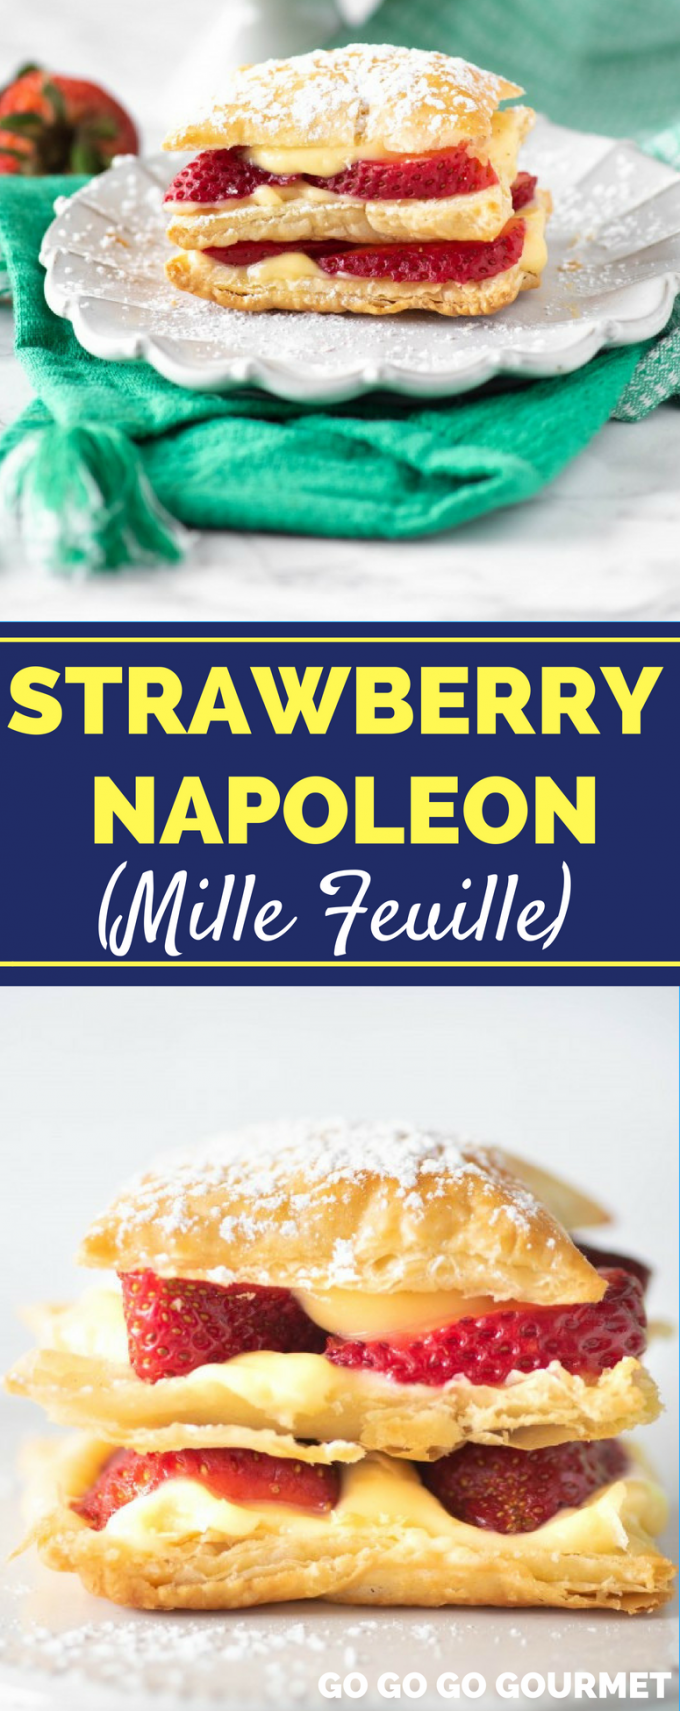 This easy Strawberry Napoleon dessert recipe (also known as mille feuille) is a classic French dessert with layers of puff pastry, fruit and custard. They are perfectly sweet and delightful! #napoleondessert #strawberrynapoleon #frenchdesserts #gogogogourmet via @gogogogourmet